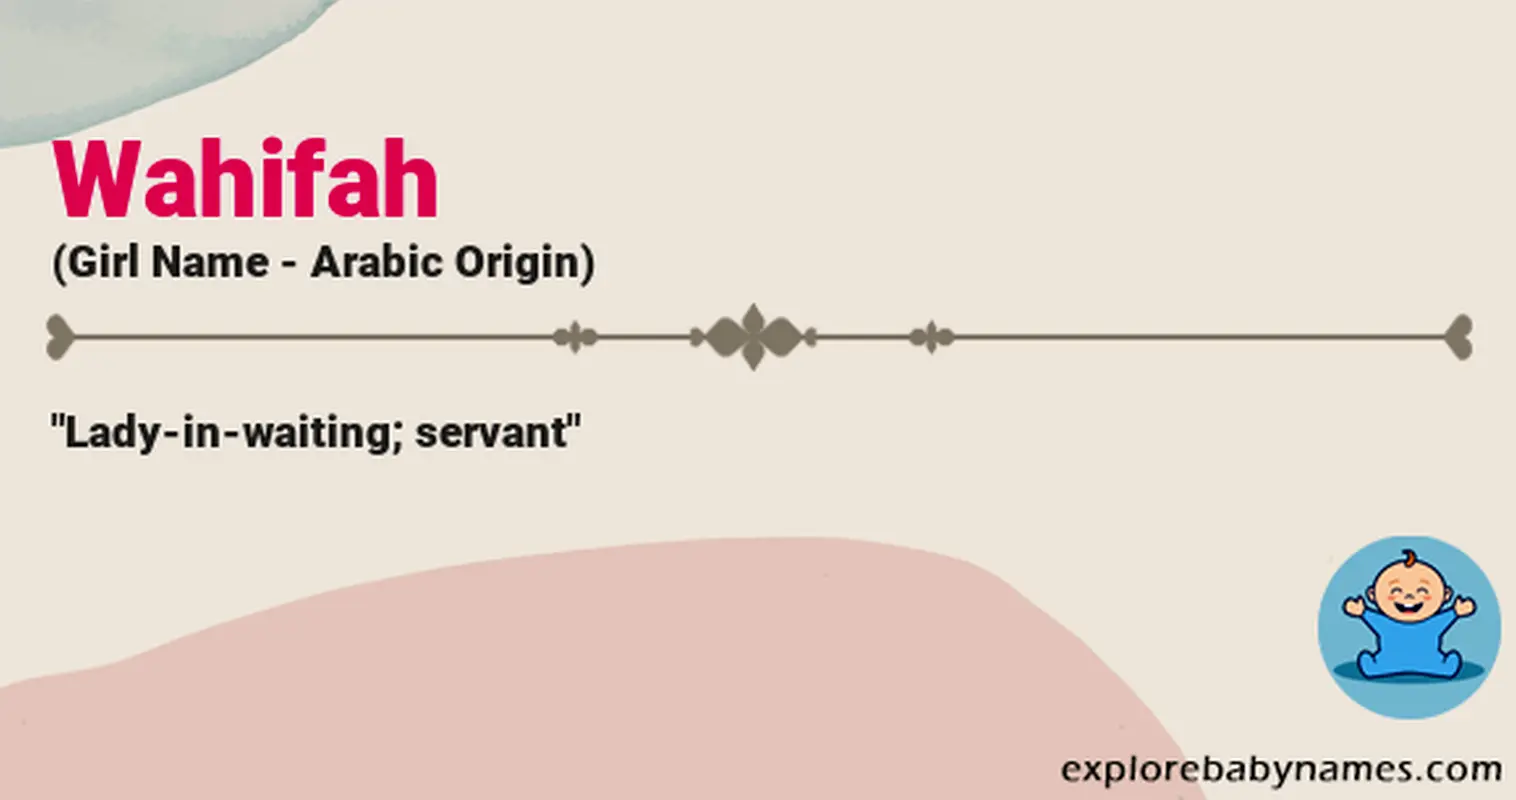 Meaning of Wahifah